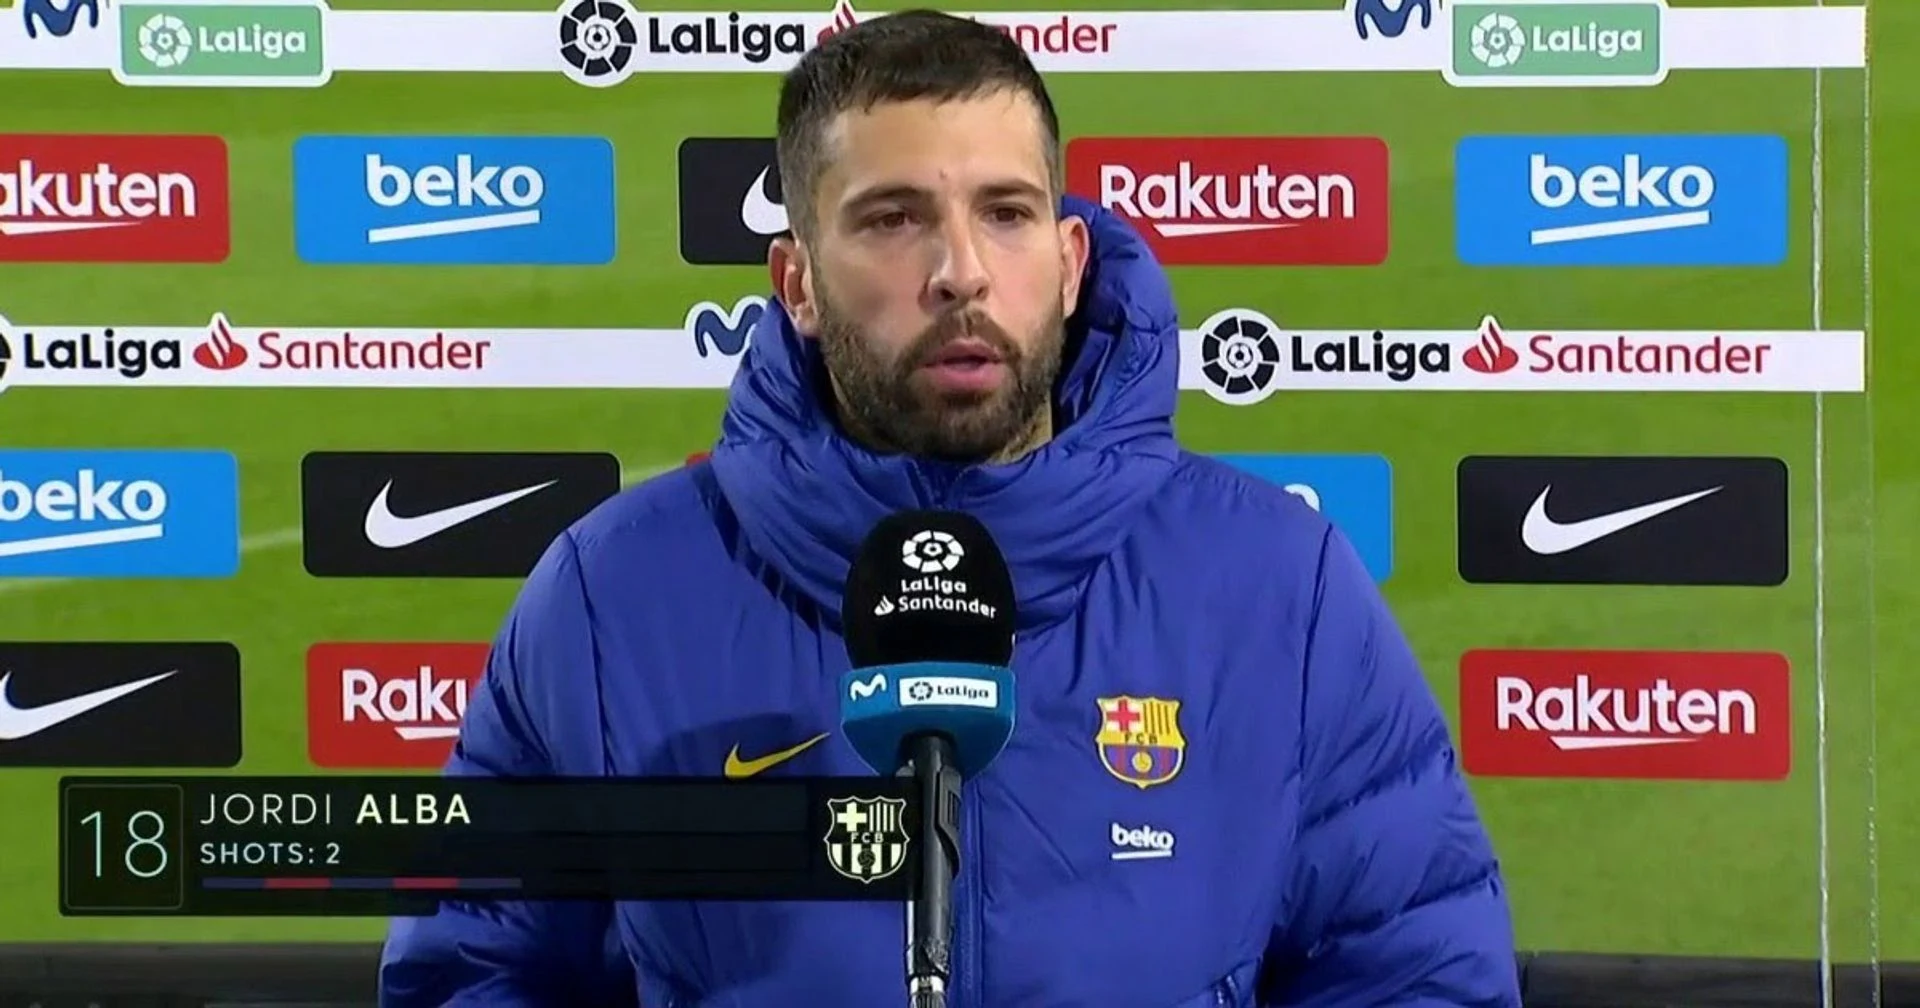 Alba reacts to Fans criticism: 'If I play okay I get criticized, if I play badly I get killed'.